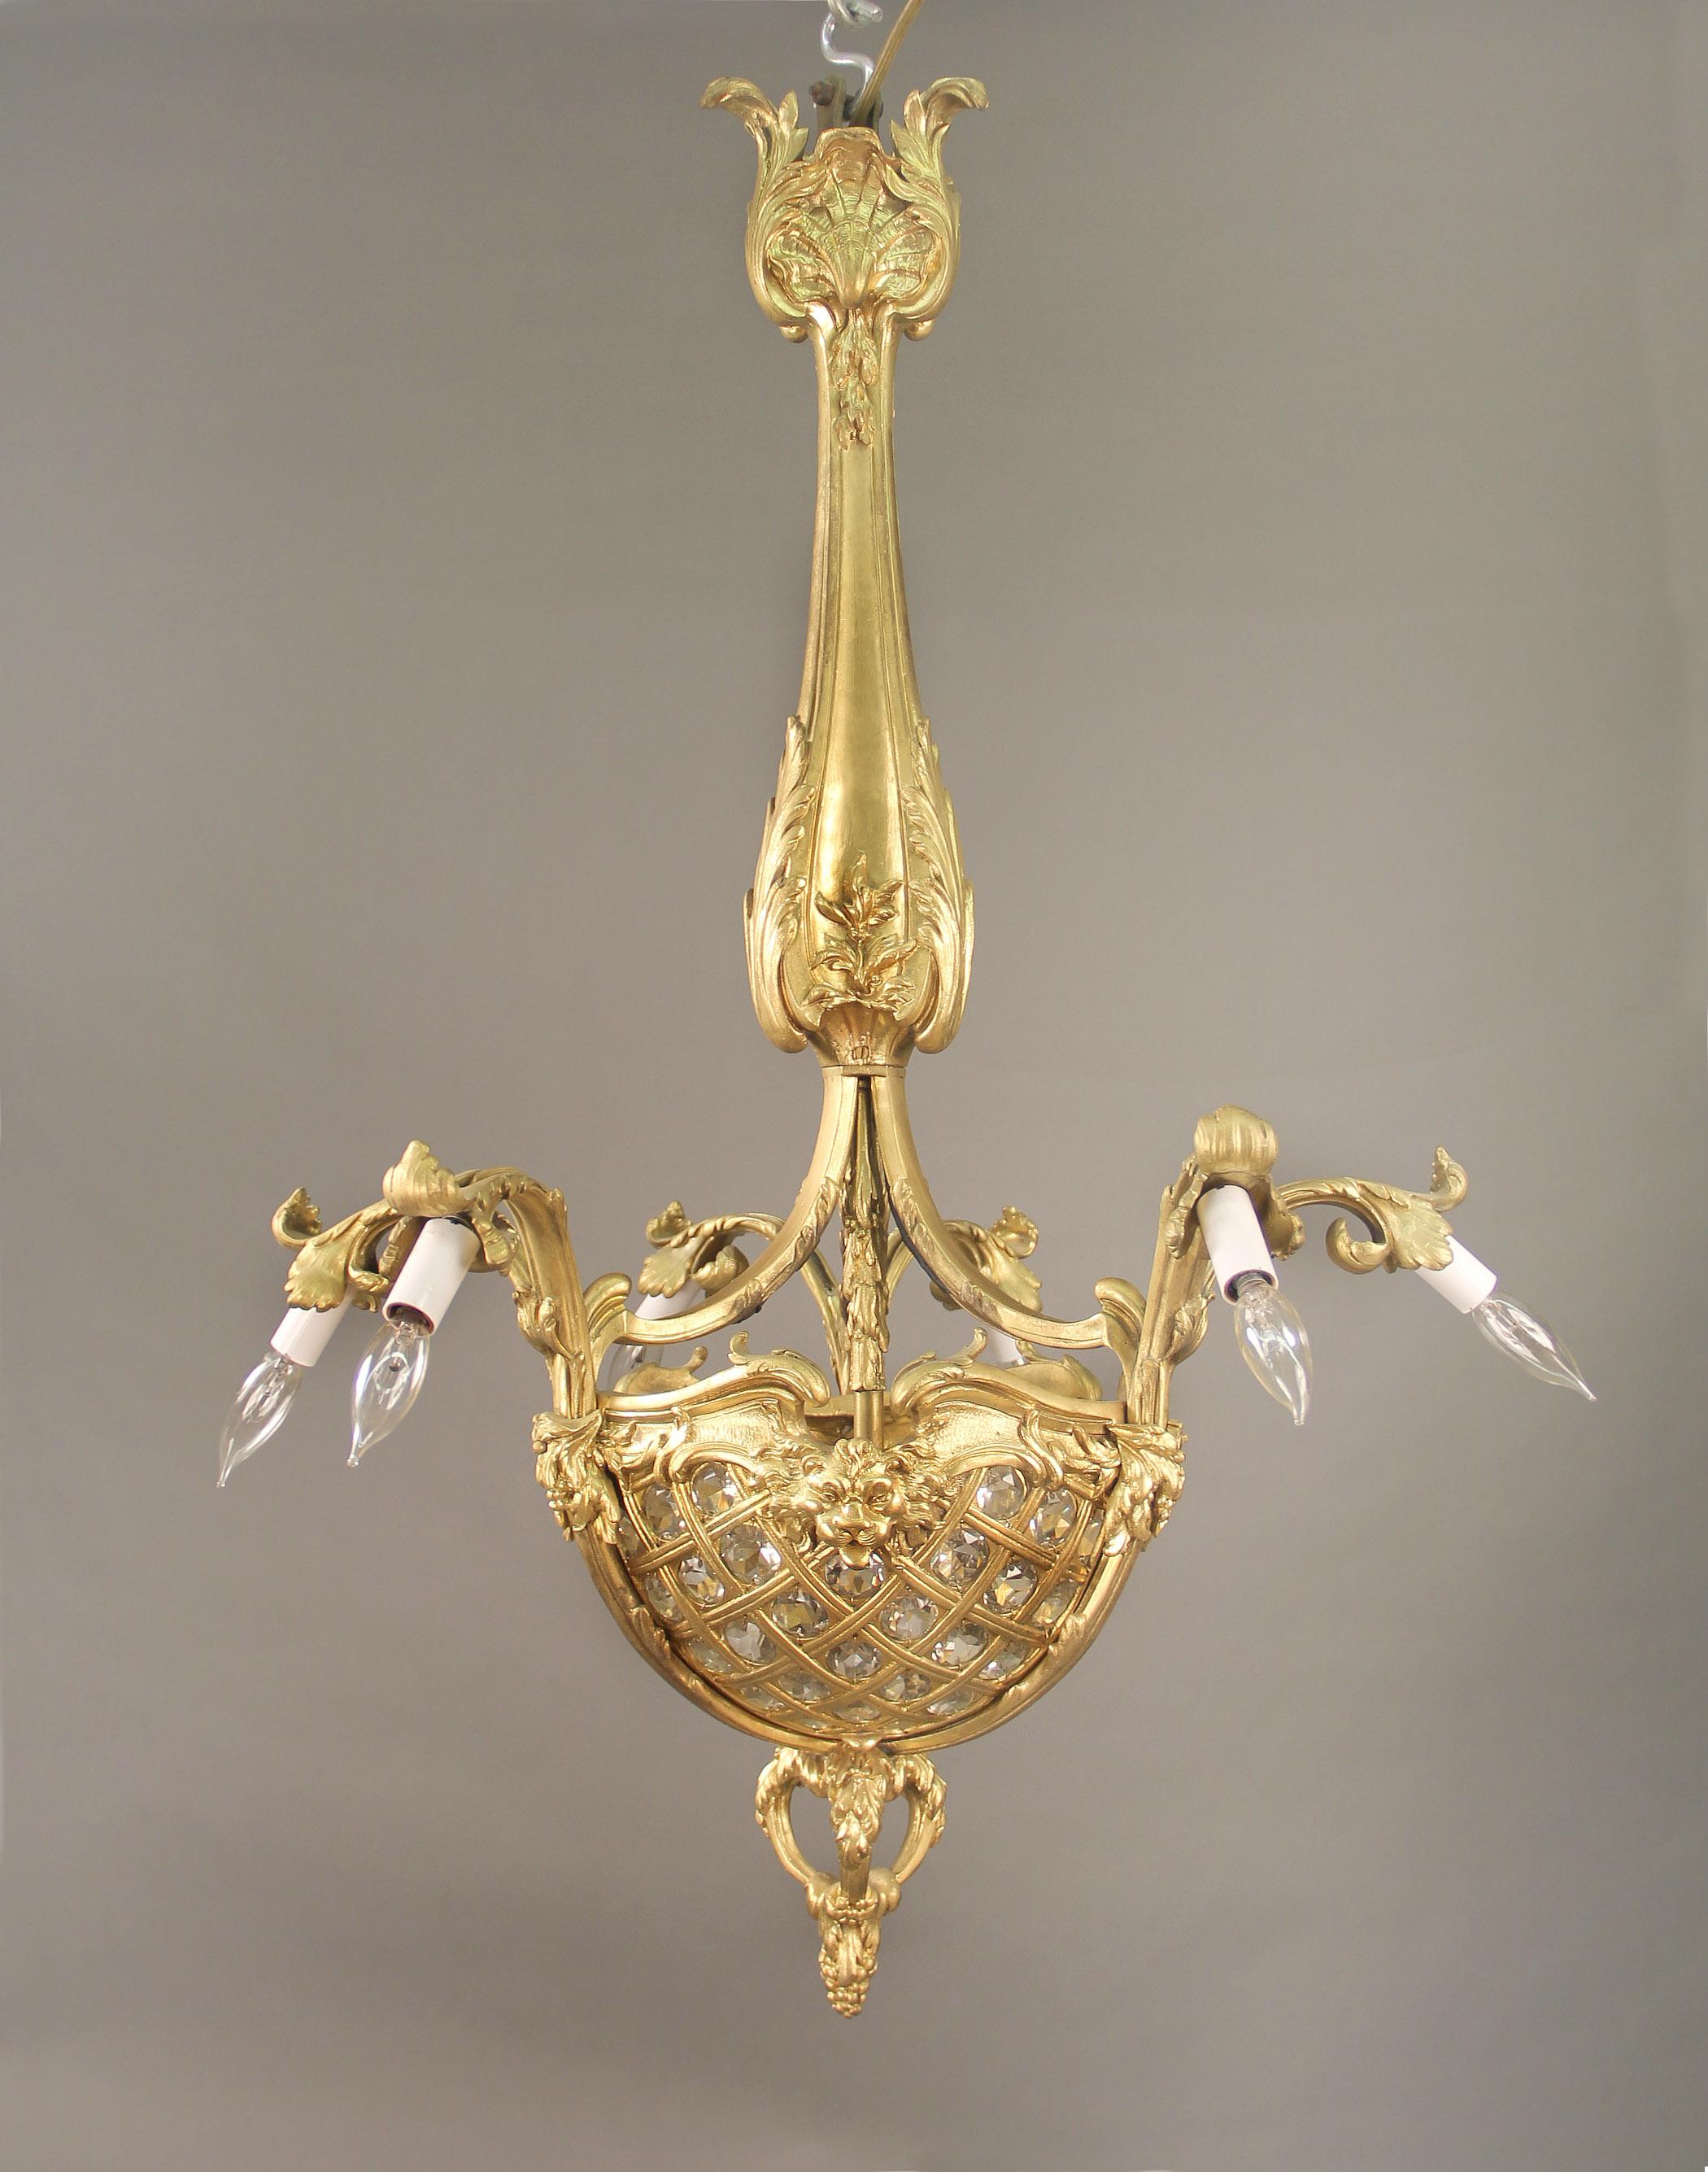 An Interesting Early 20th Century Gilt Bronze Nine Light Chandelier

The crown beautifully designed with sea shells, the body leading down to a three sided beaded basket centered by large lion masks, finishing with a large finial bottom with